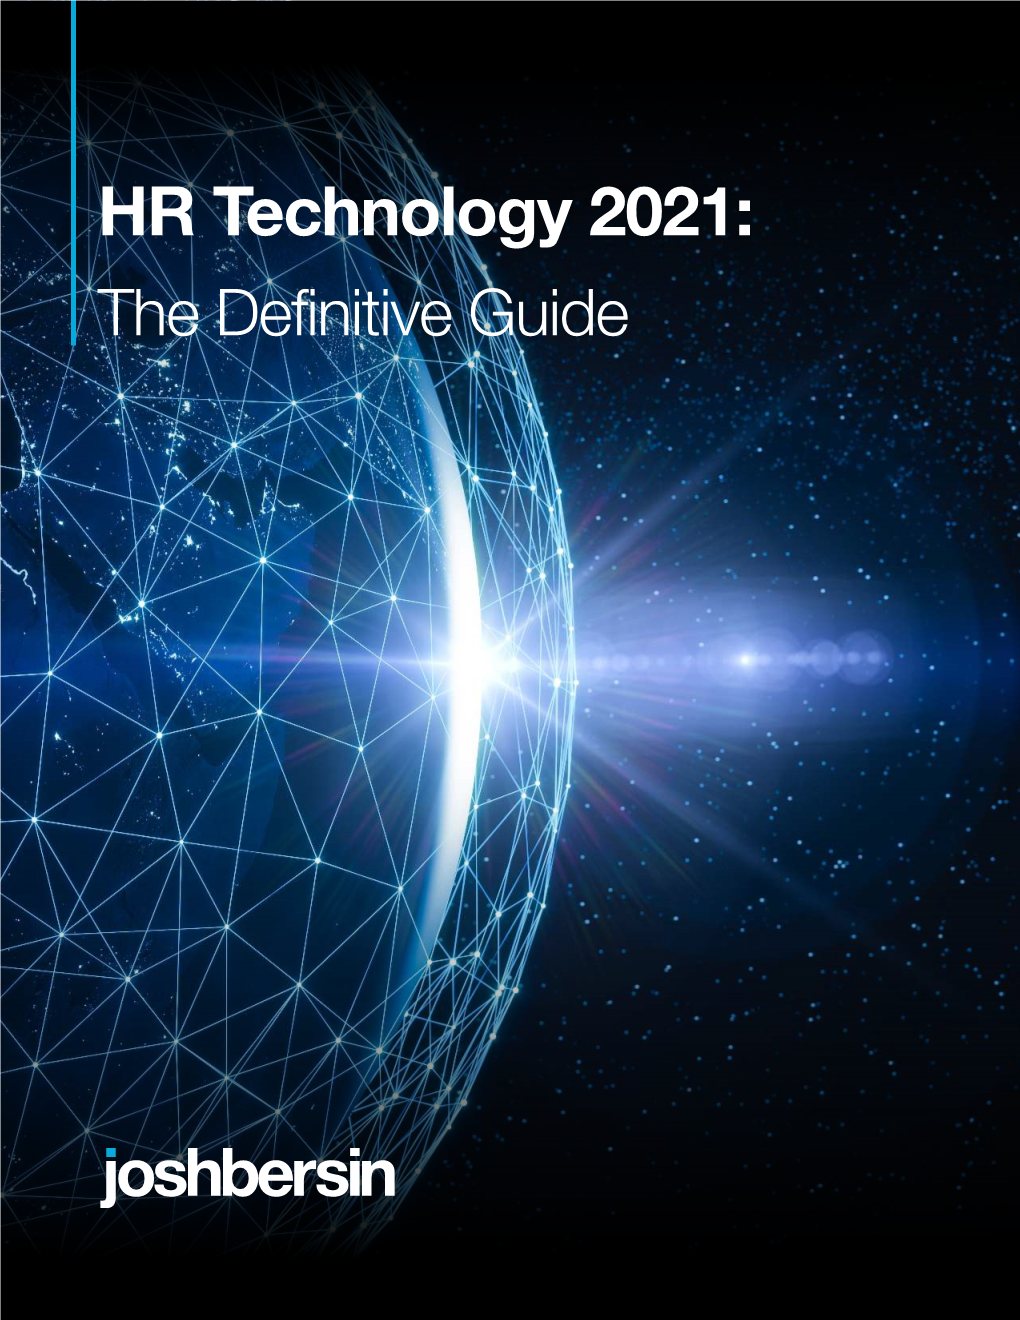 HR Technology 2021: the Definitive Guide Introduction